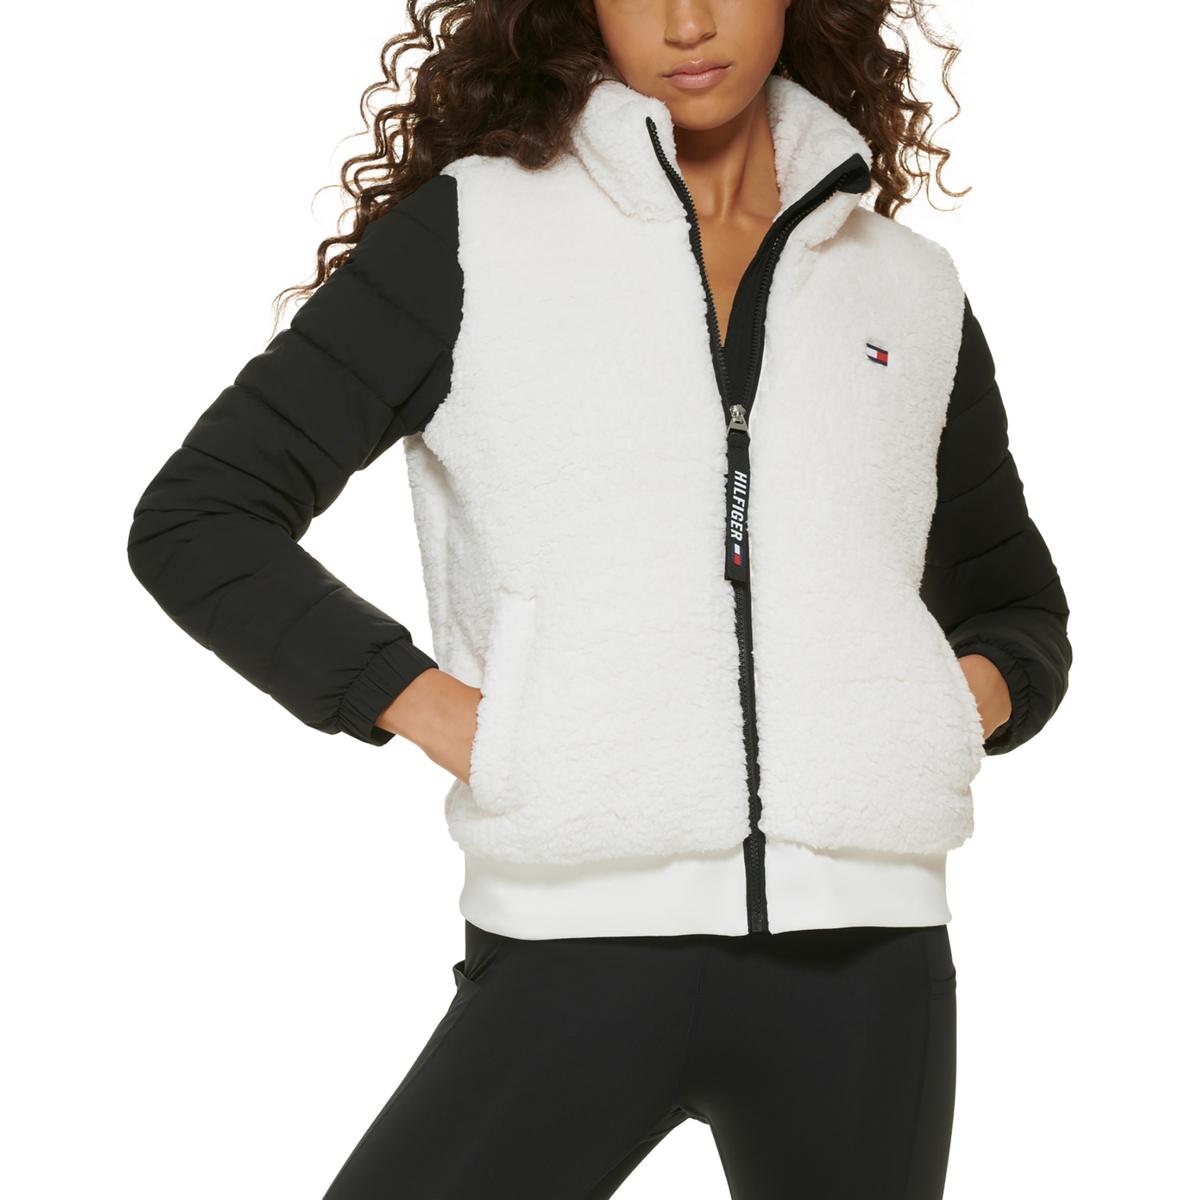 Tommy Hilfiger Sport Womens Cropped Activewear Zip-Up Jacket